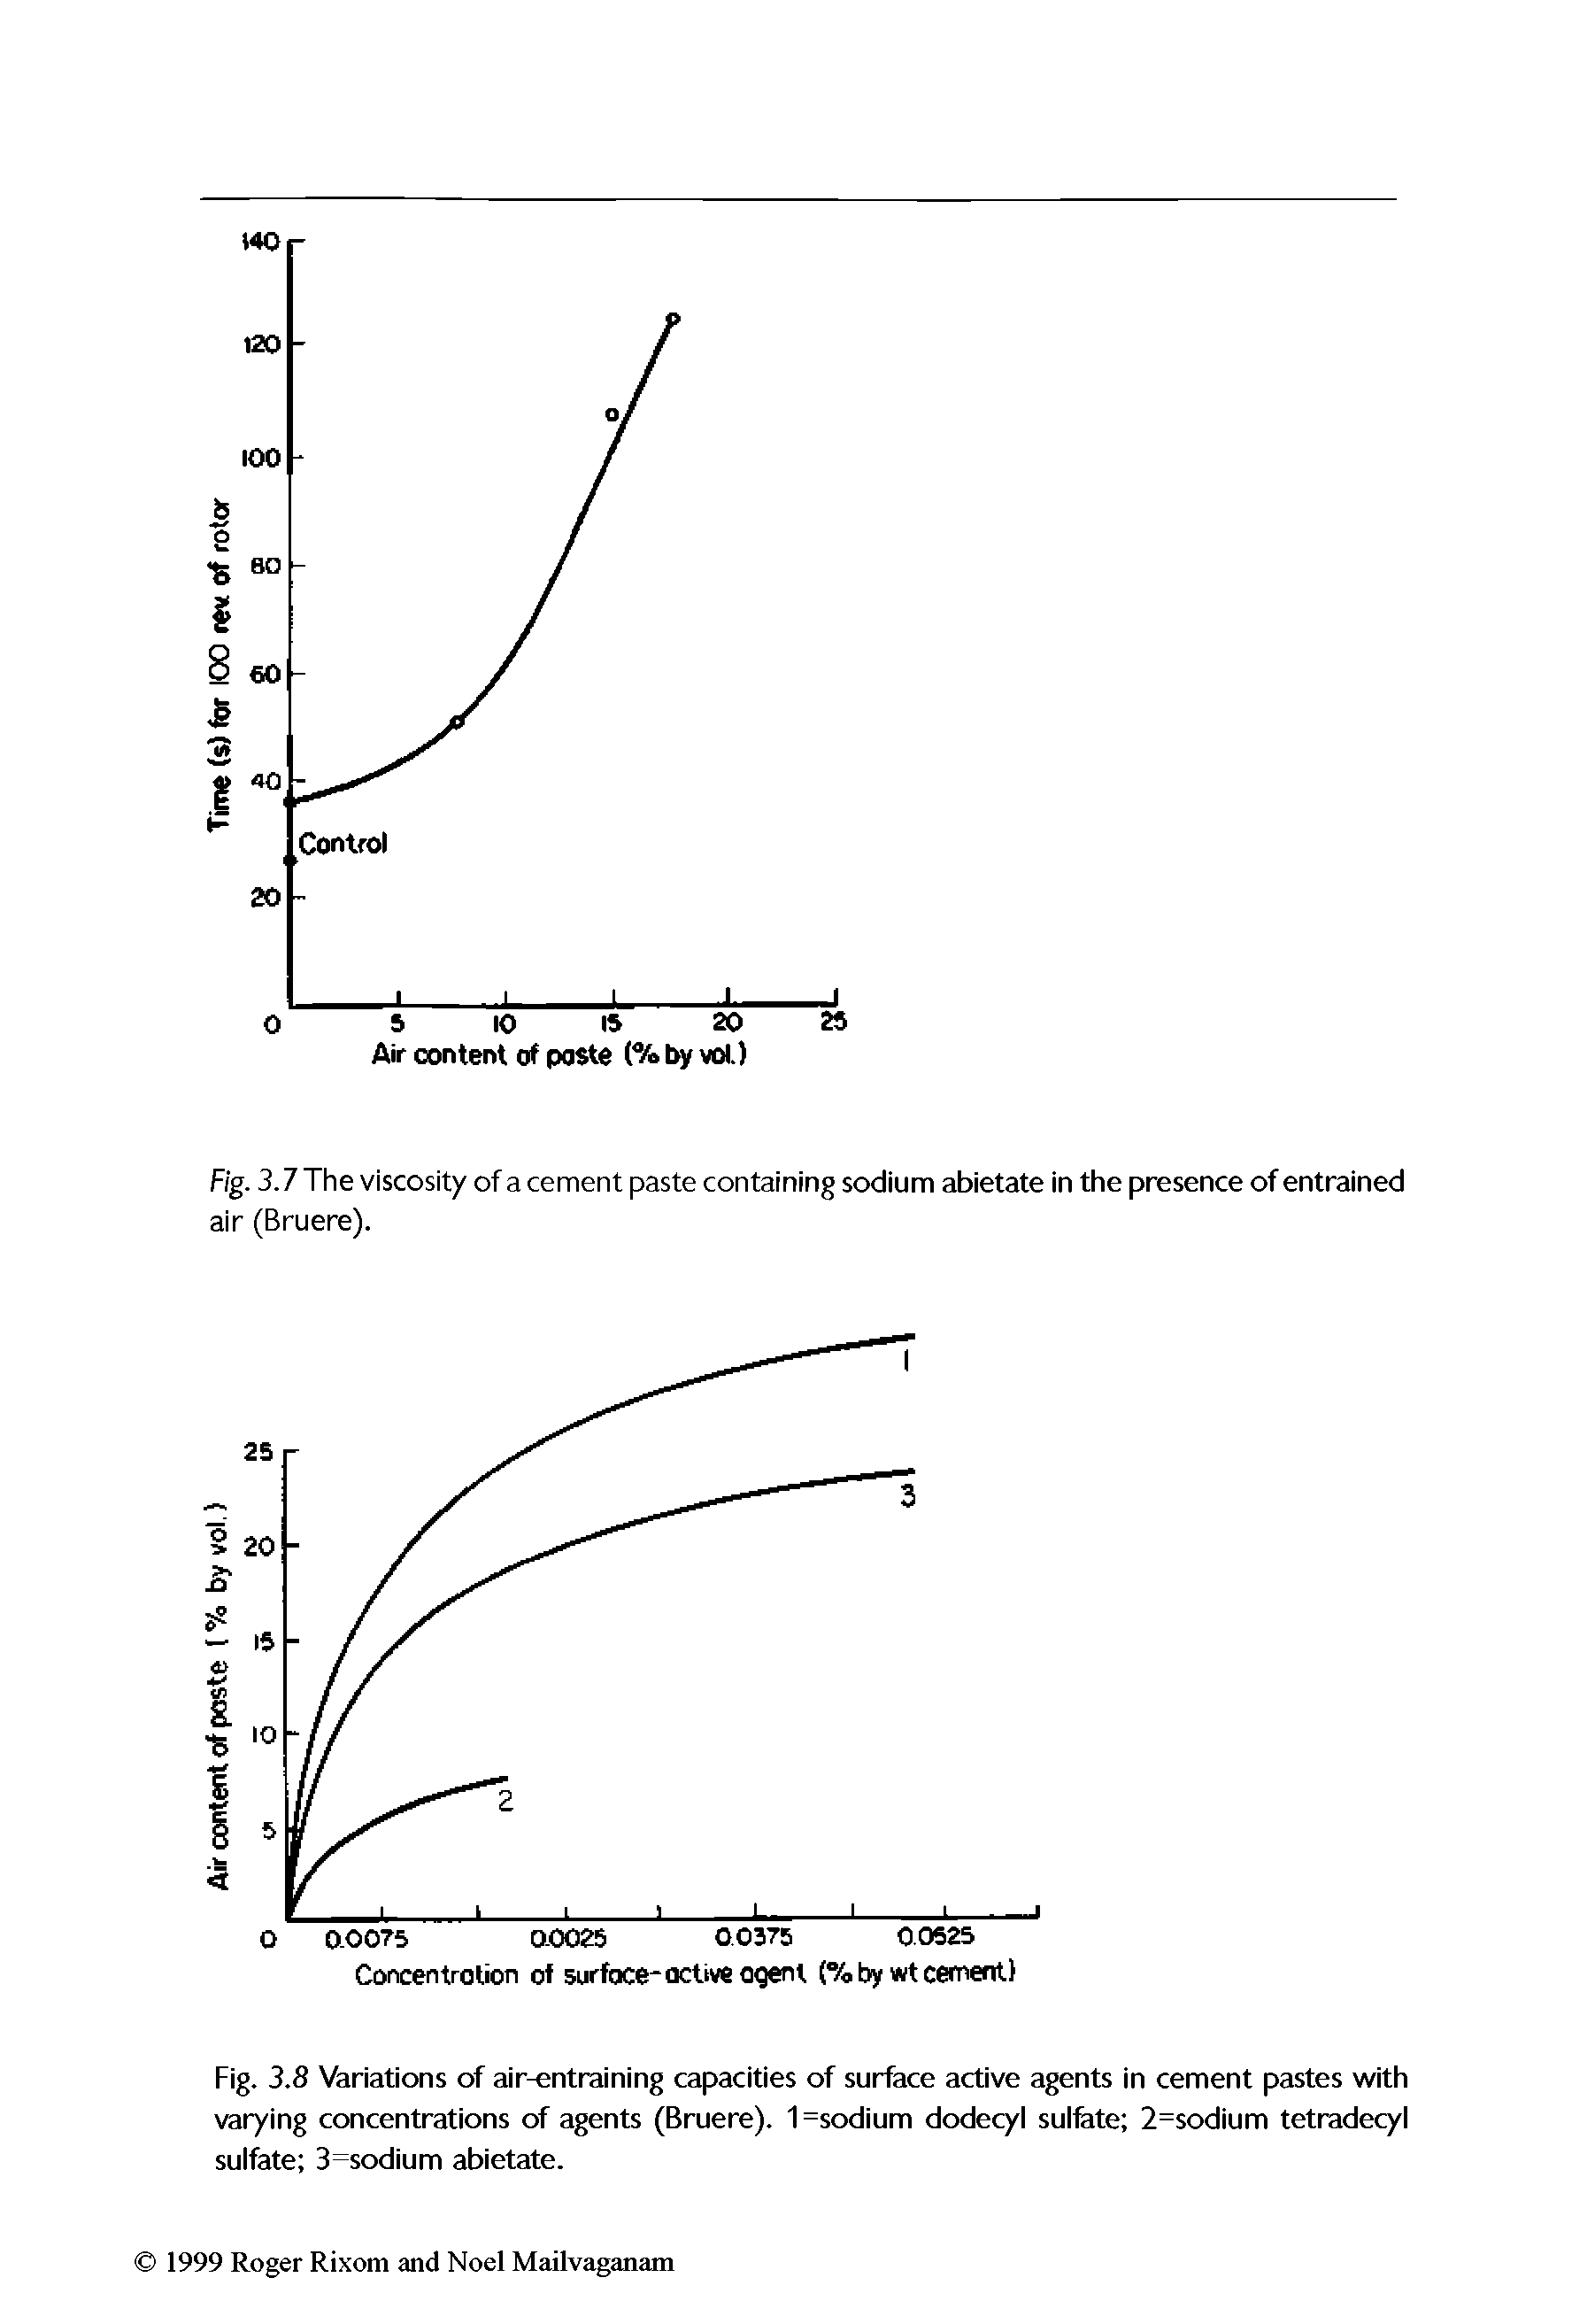 Fig. 3.8 Variations of air-entraining capacities of surface active agents in cement pastes with varying concentrations of agents (Bruere). 1=sodium dodecyl sulfate 2=sodium tetradecyl sulfate 3=sodium abietate.